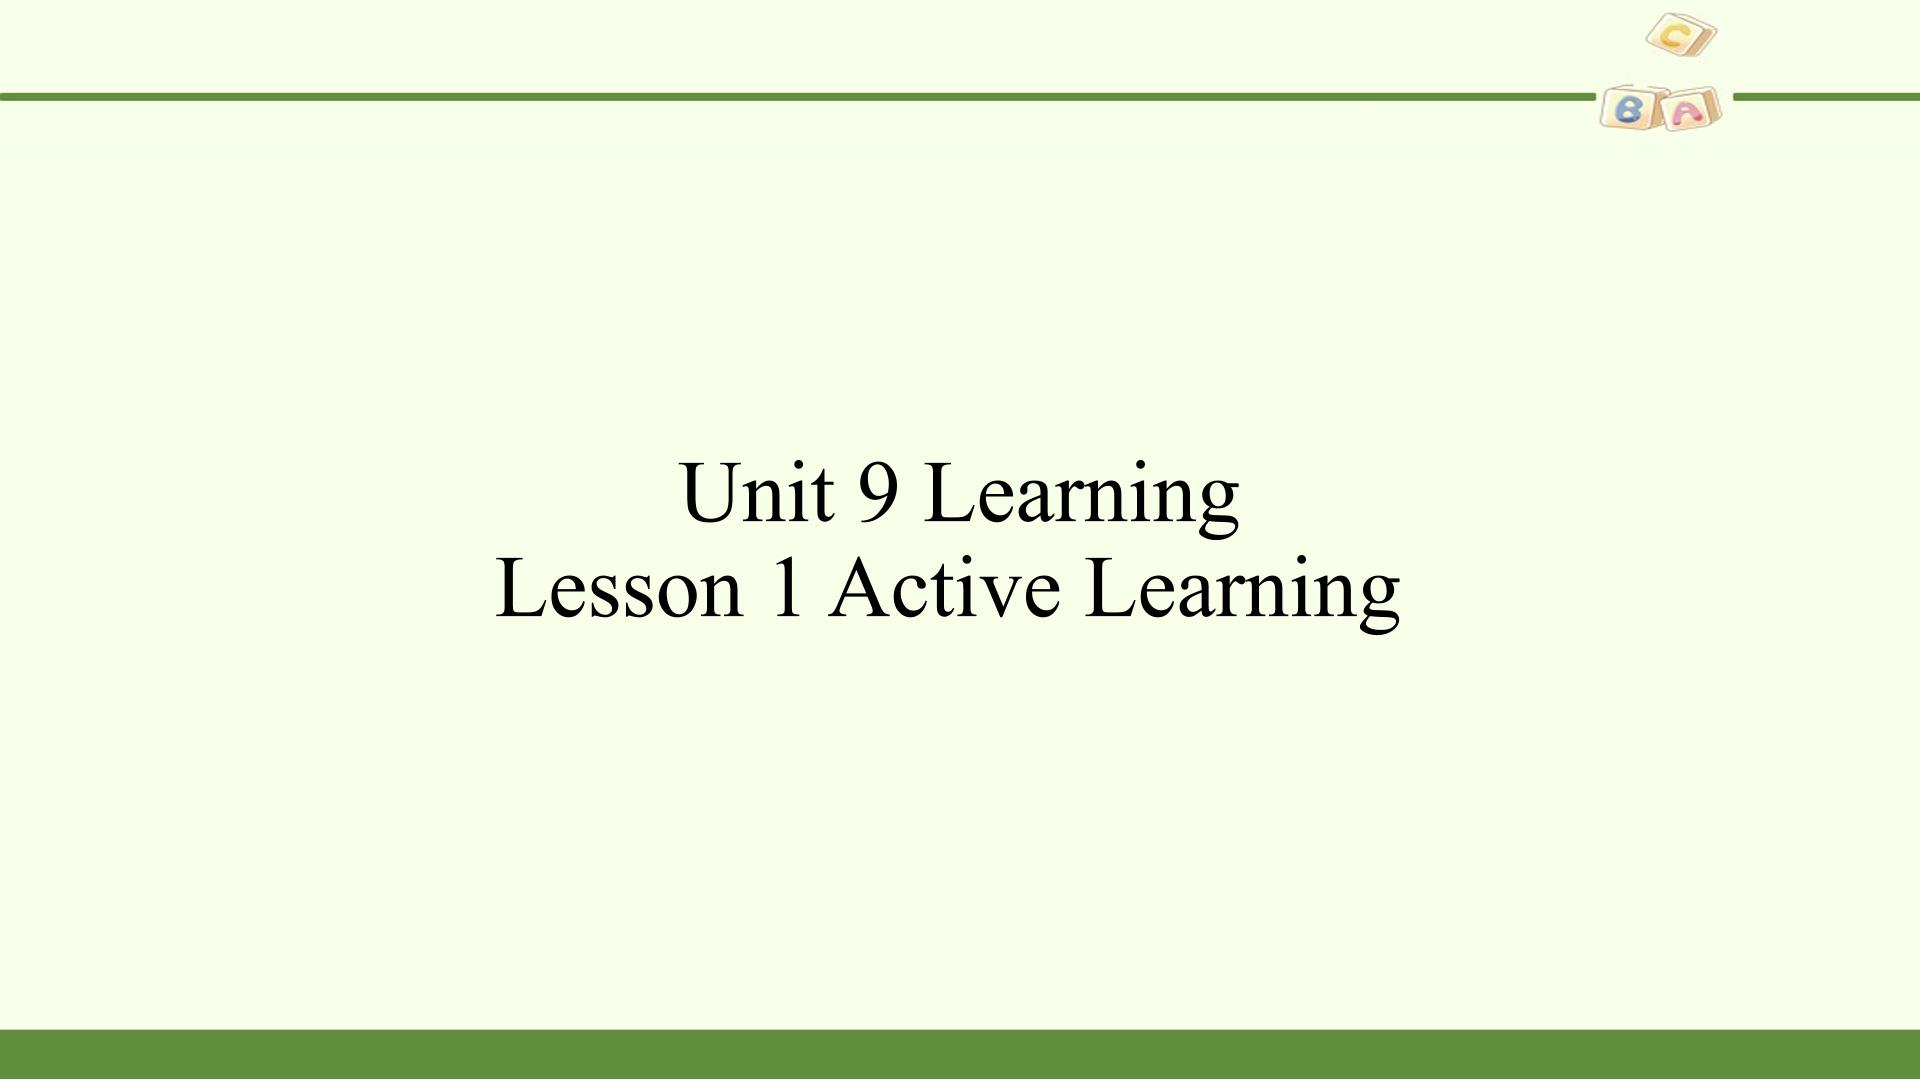 Lesson 1 Active Learning